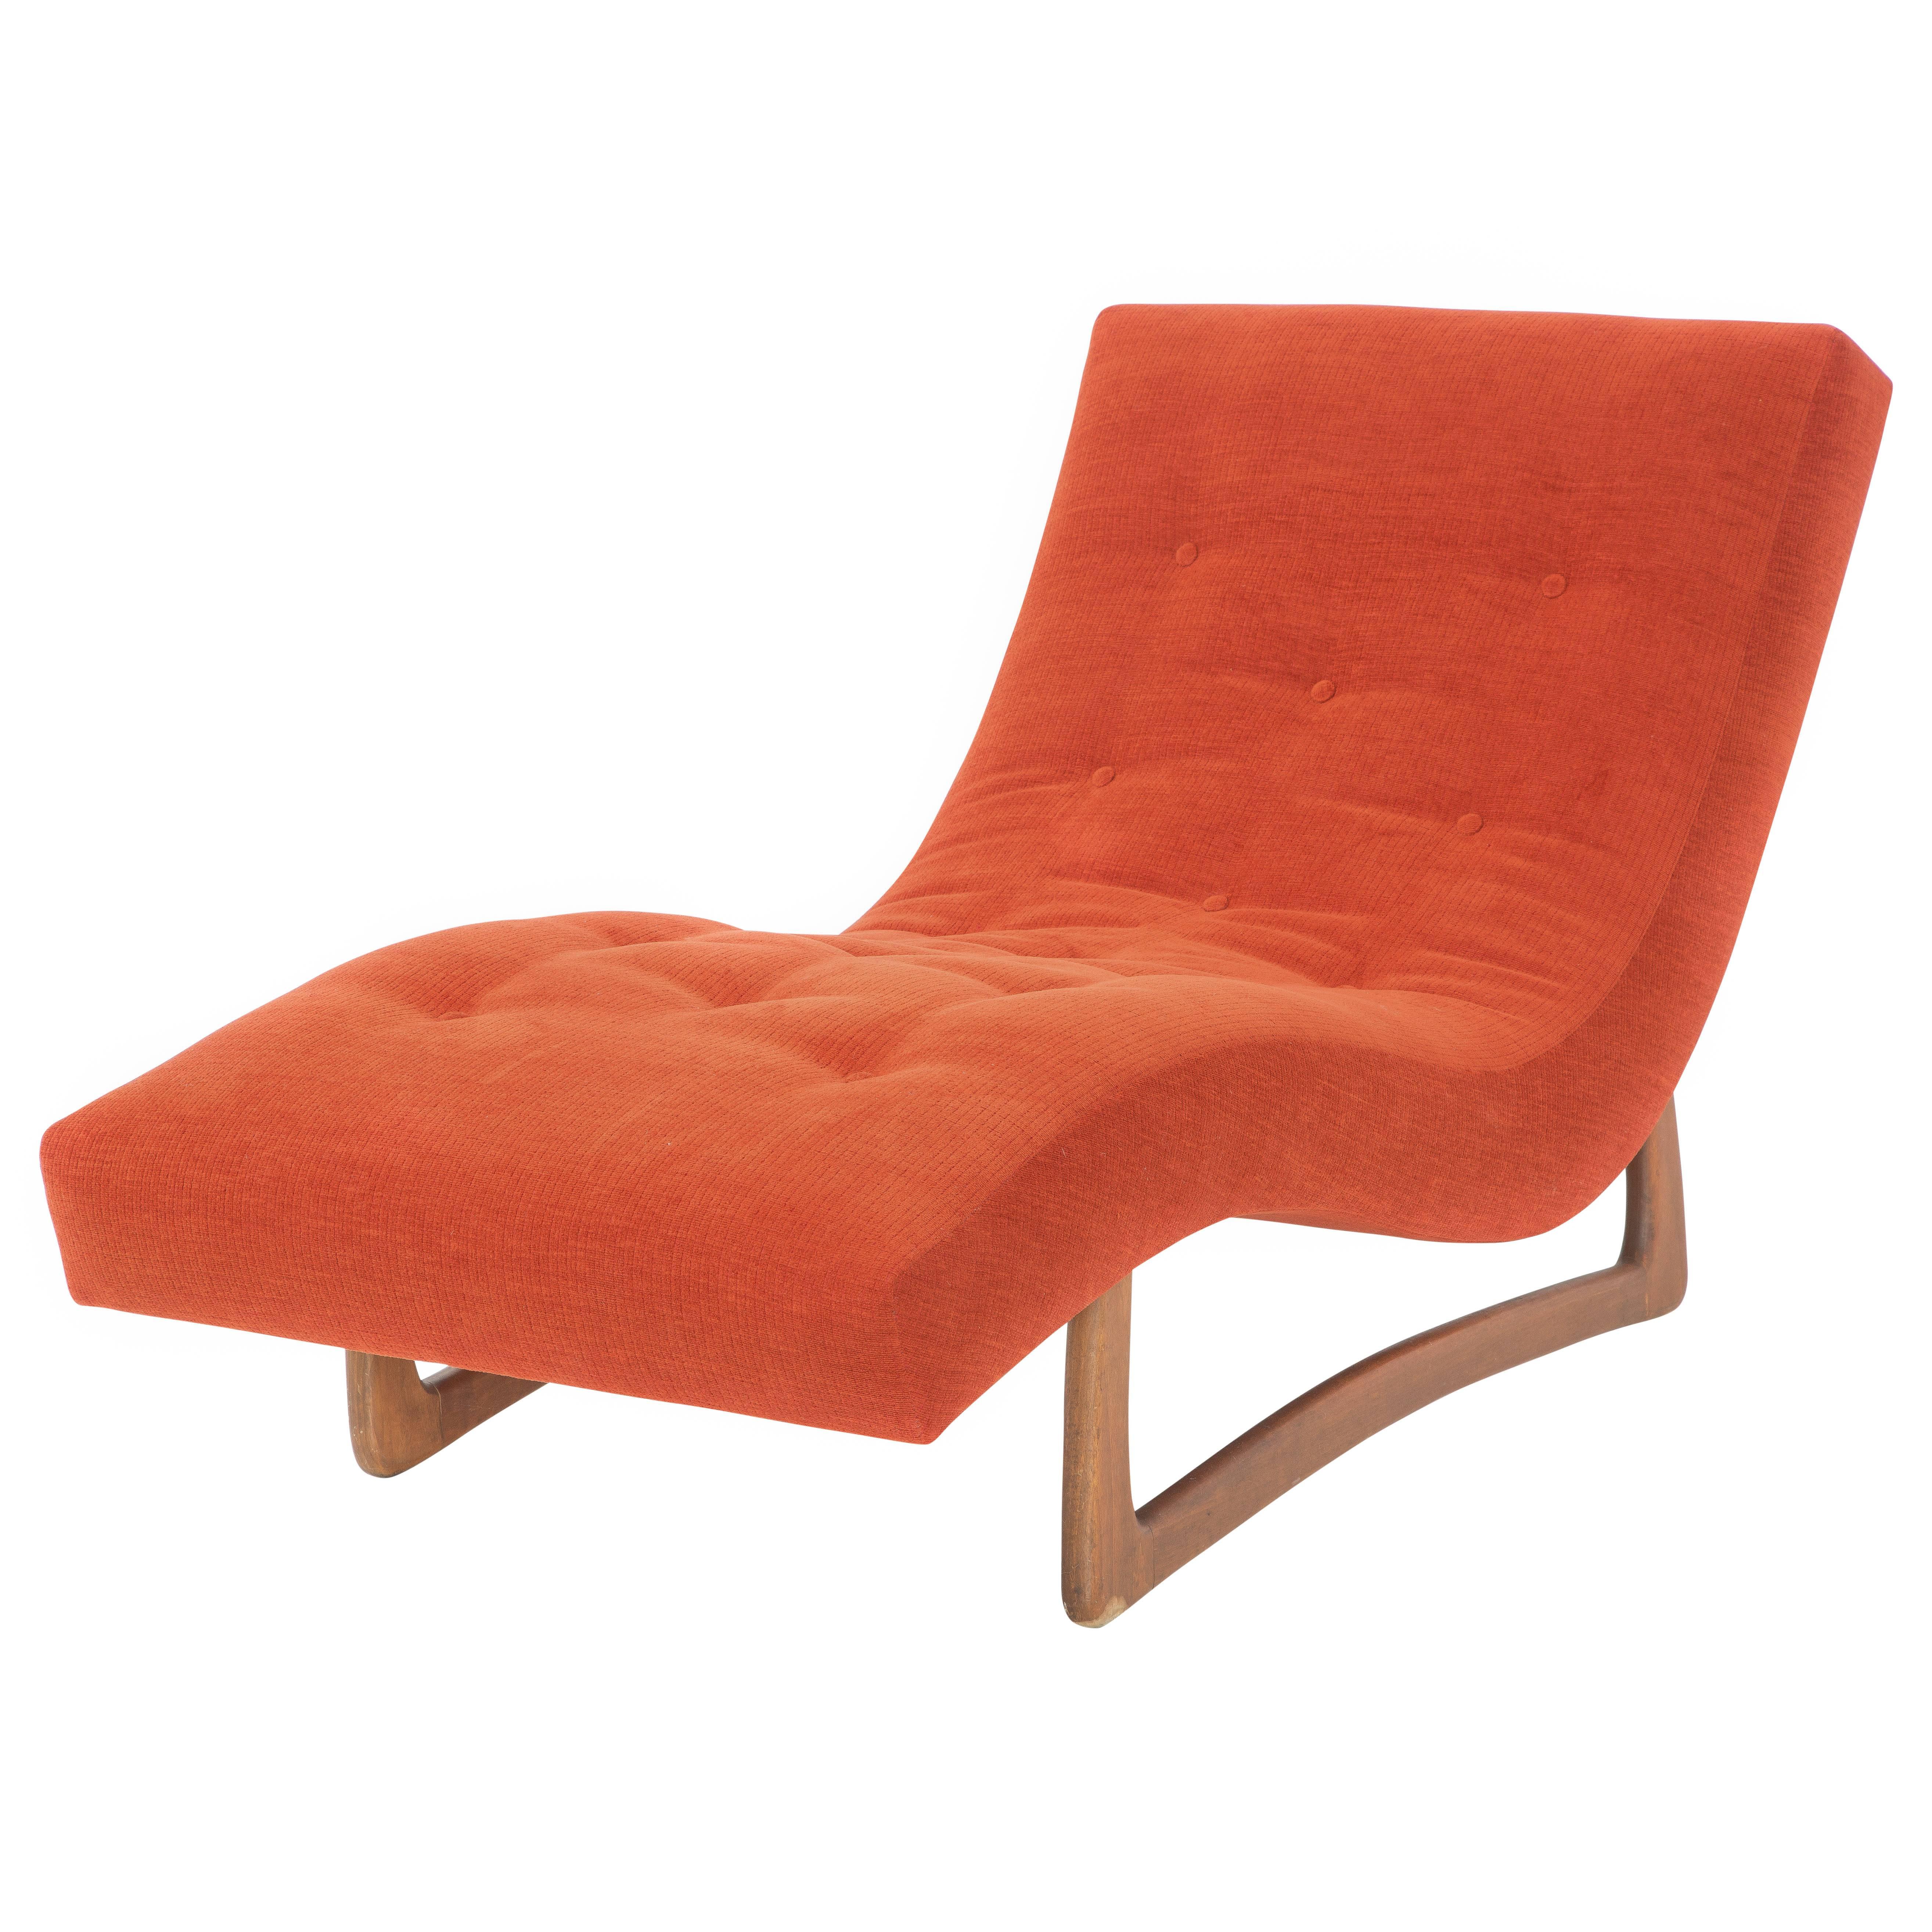 Mid-Century Modern Adrian Pearsall Contour Wave Lounge Chair